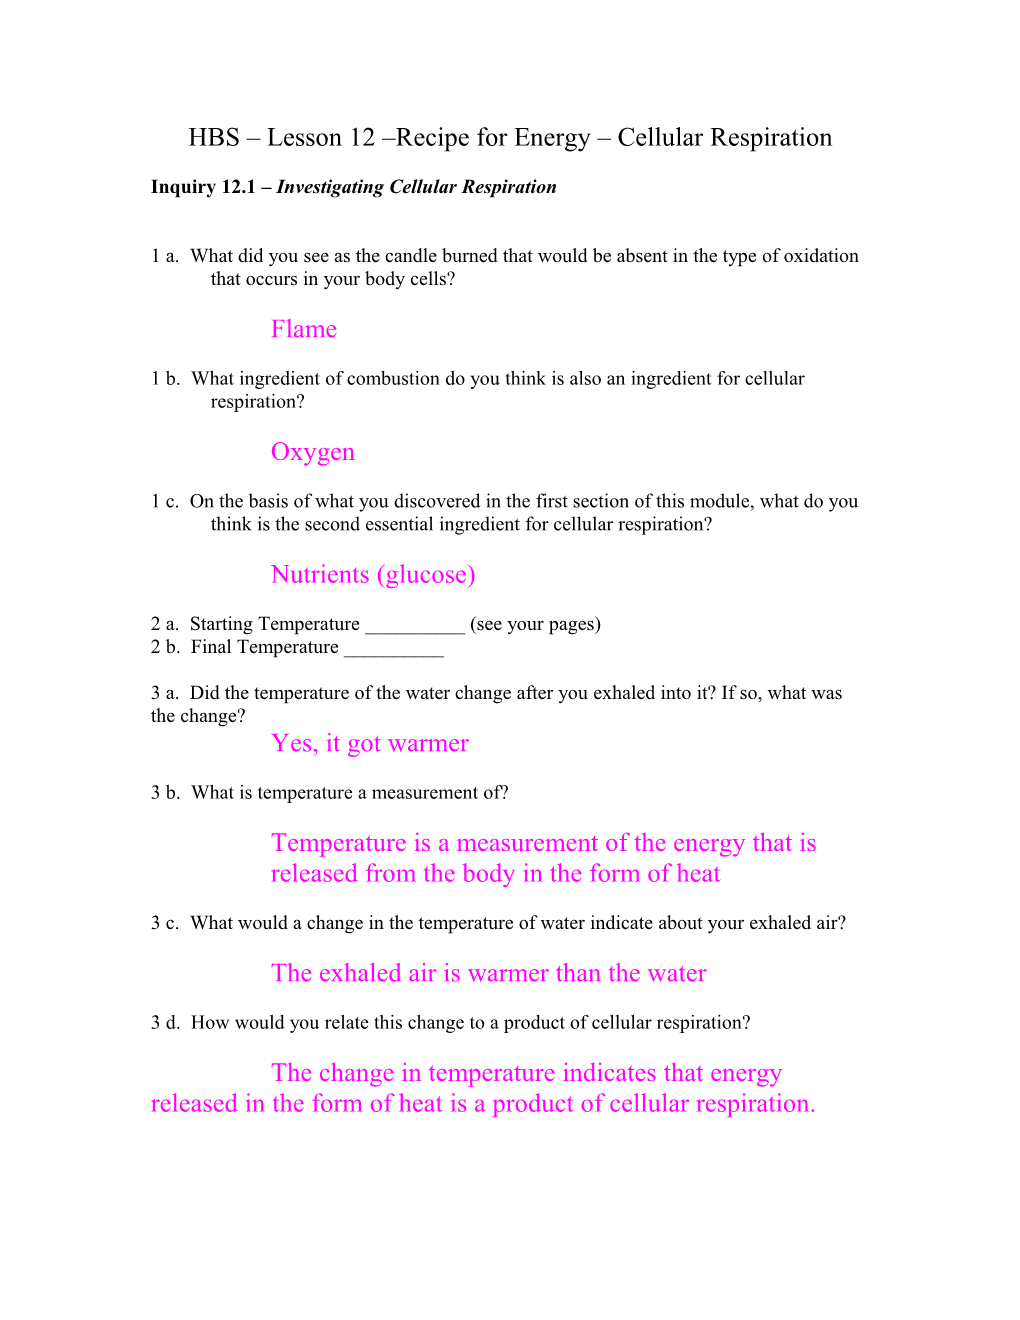 HBS Lesson 12 Recipe for Energy Cellular Respiration